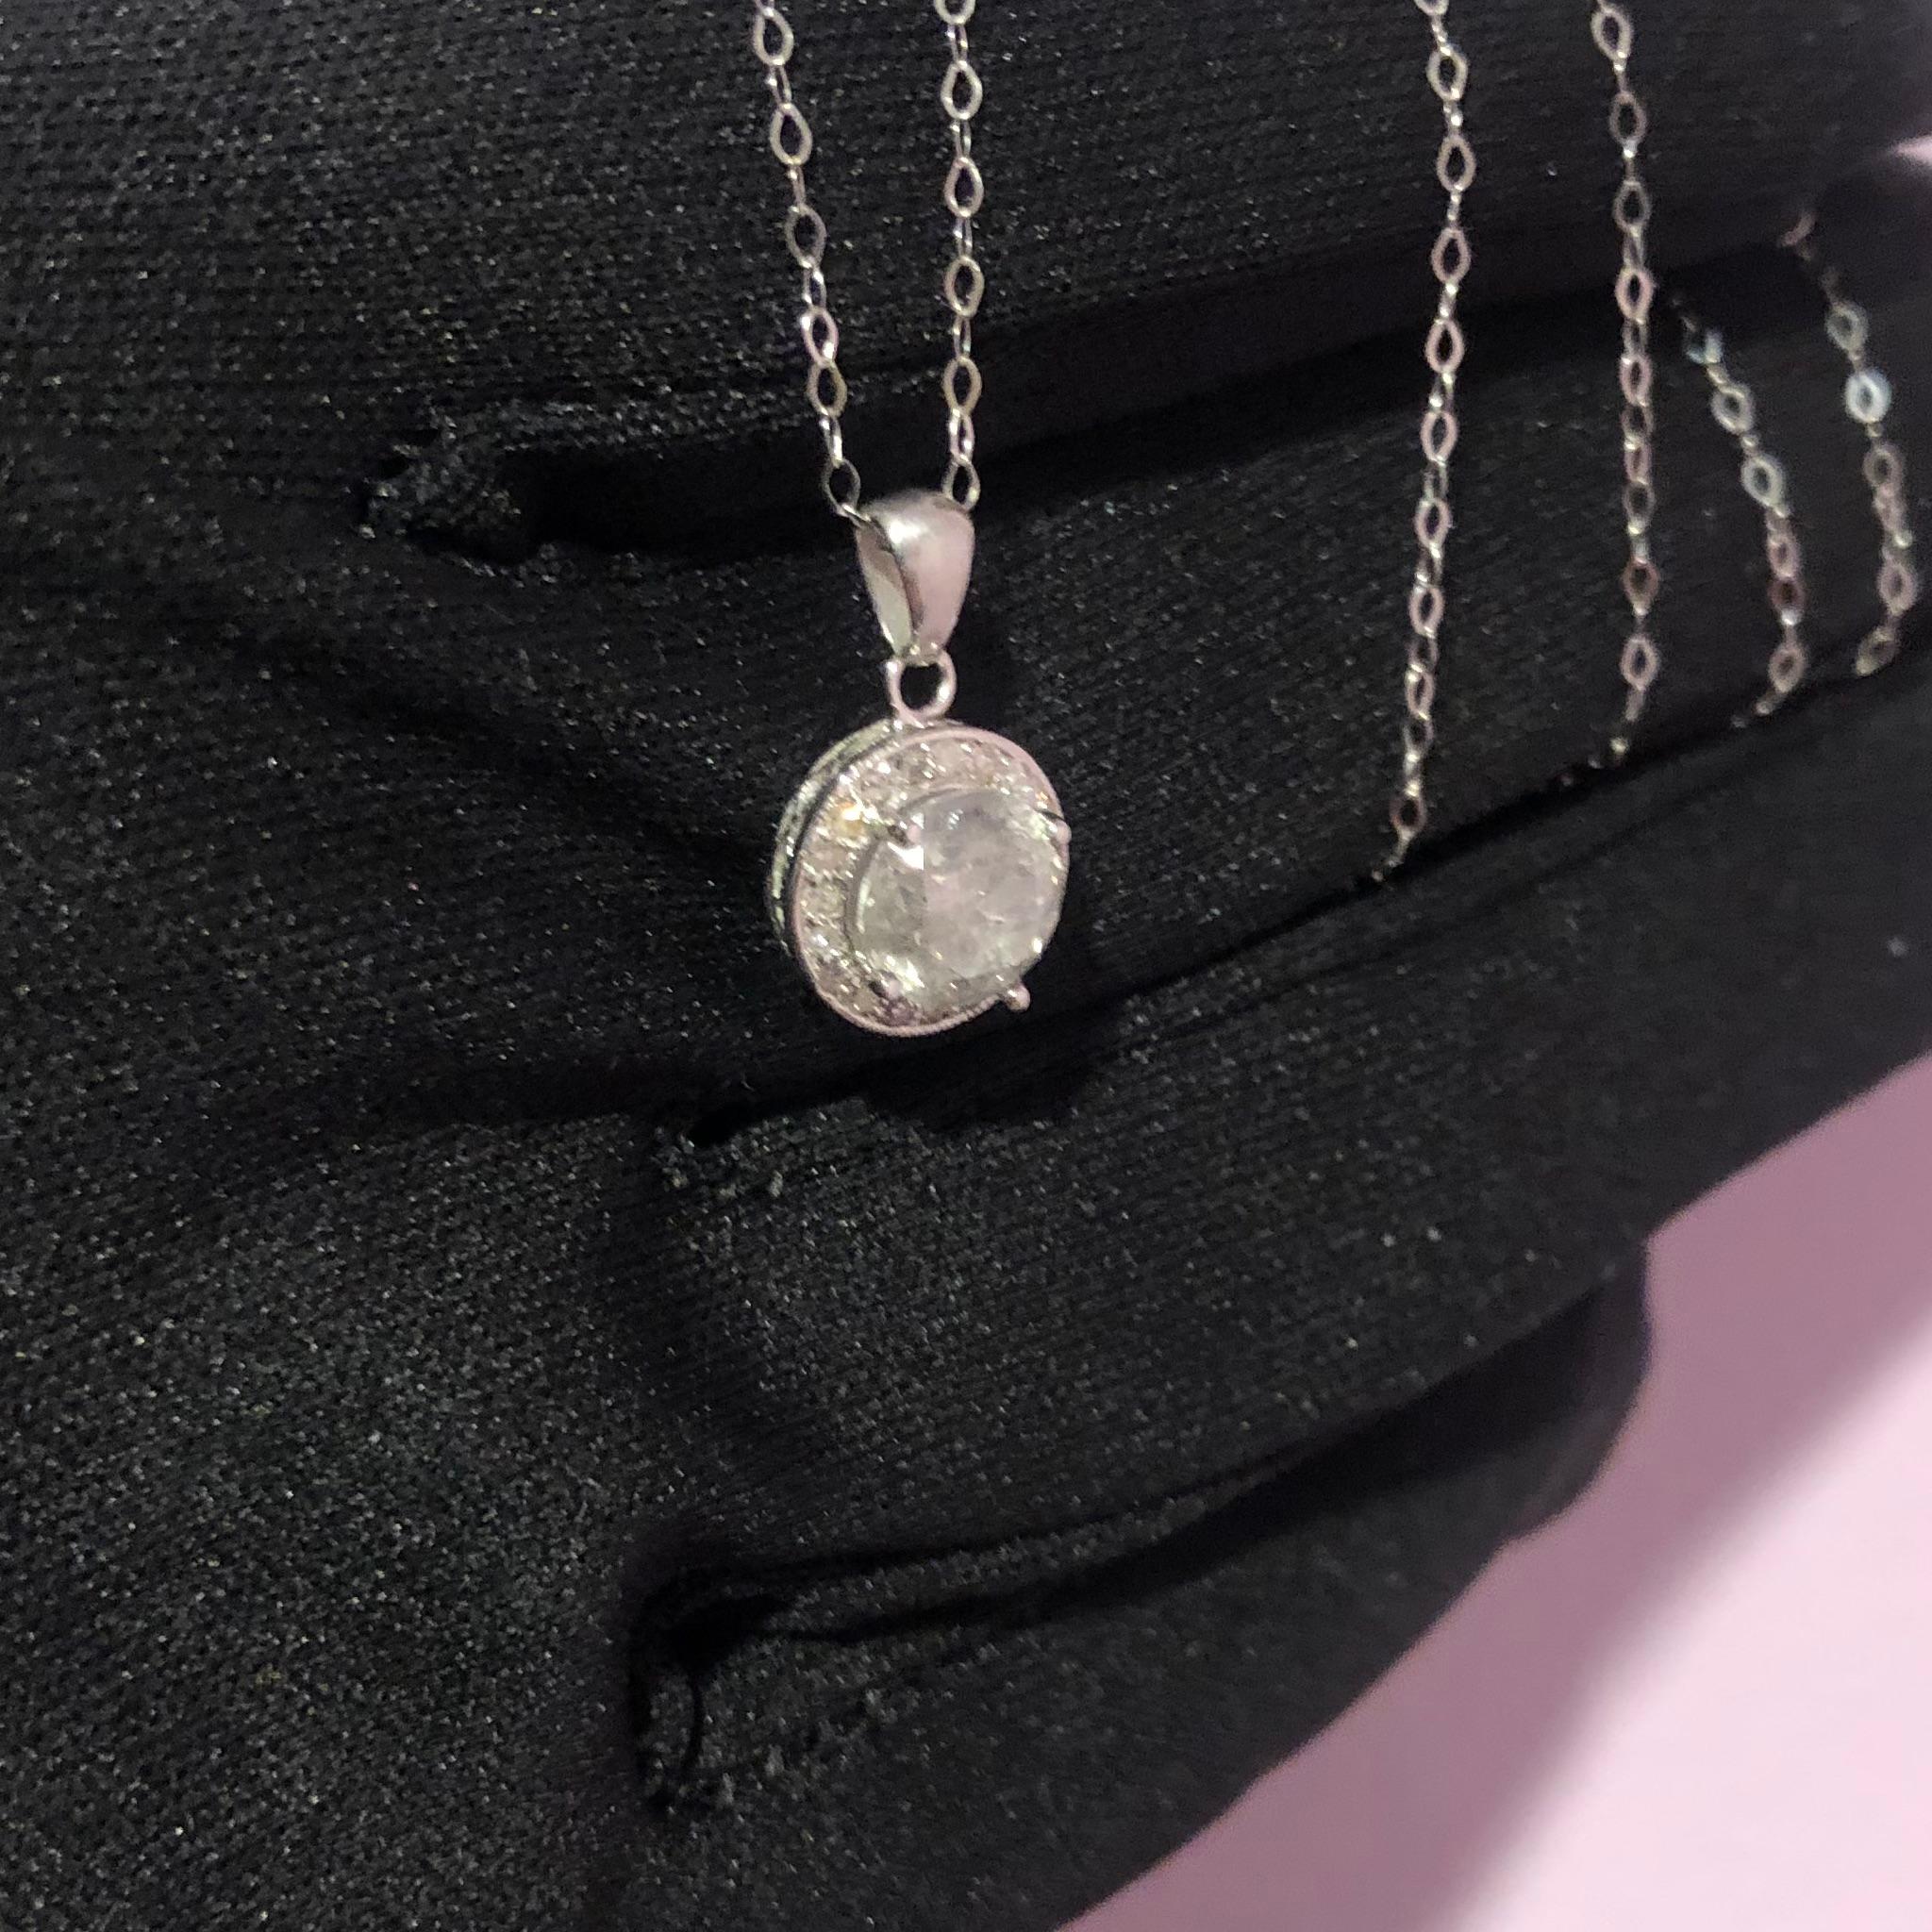 2 Carat Ct Brilliant Round Diamond Halo Pendant Necklace in 14k White Gold In New Condition For Sale In New York, NY